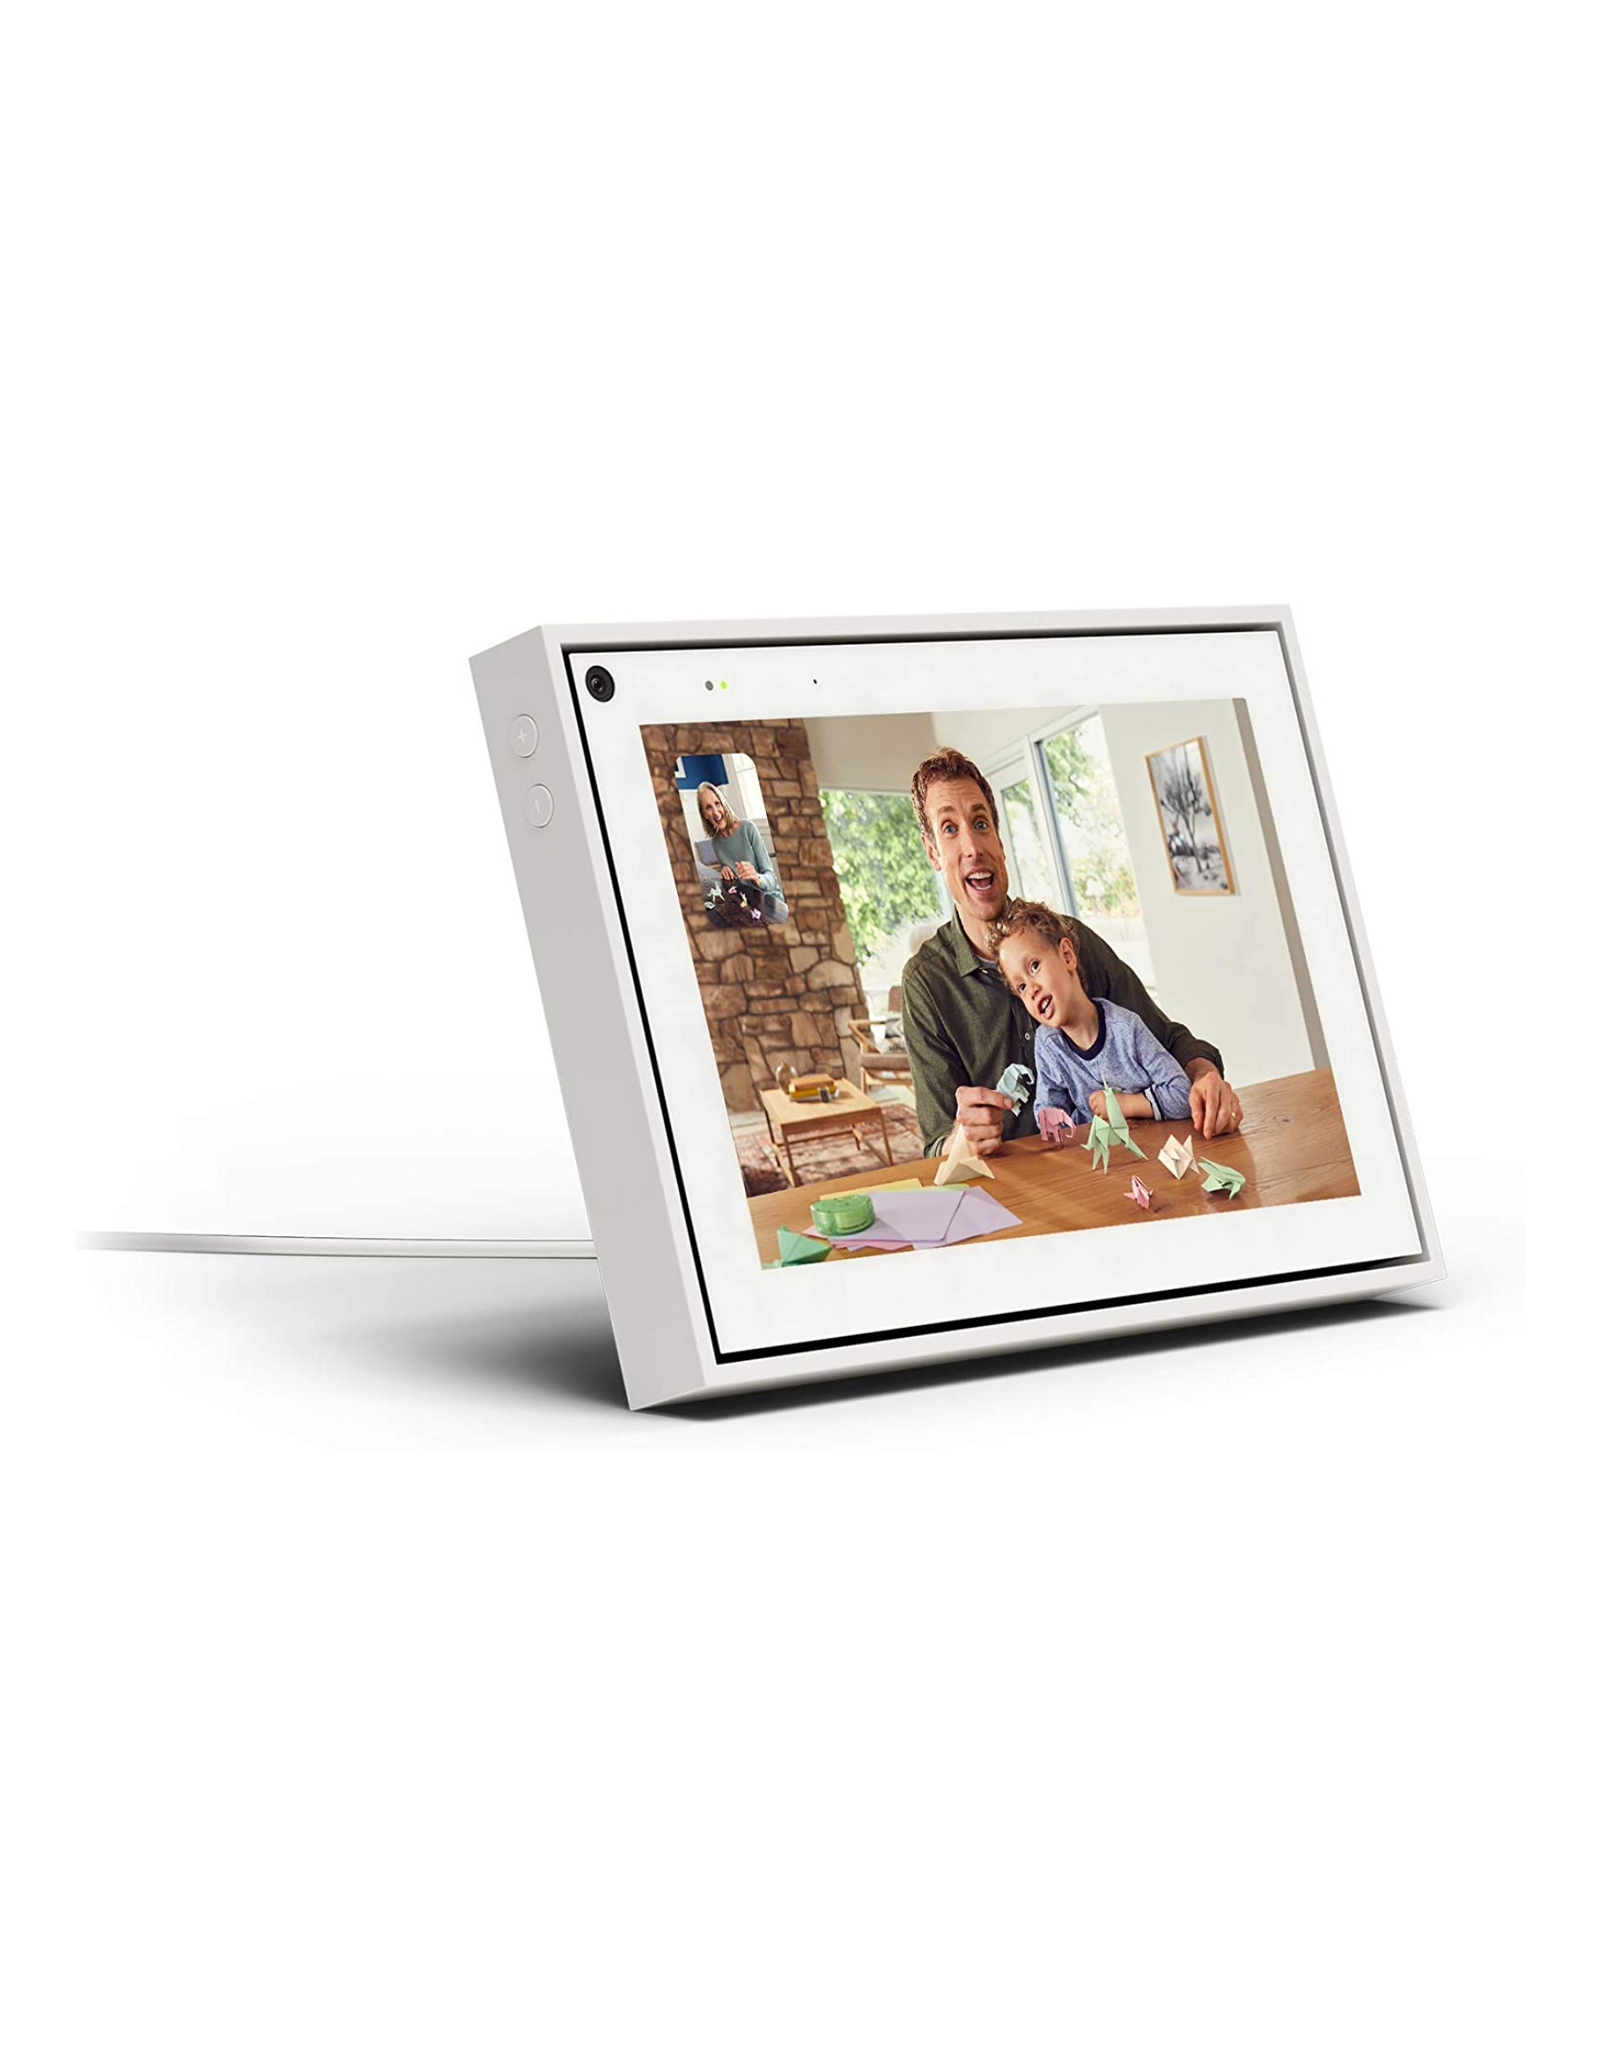 Facebook Portal Mini, 8 Inch Touch Screen Display with Alexa, White